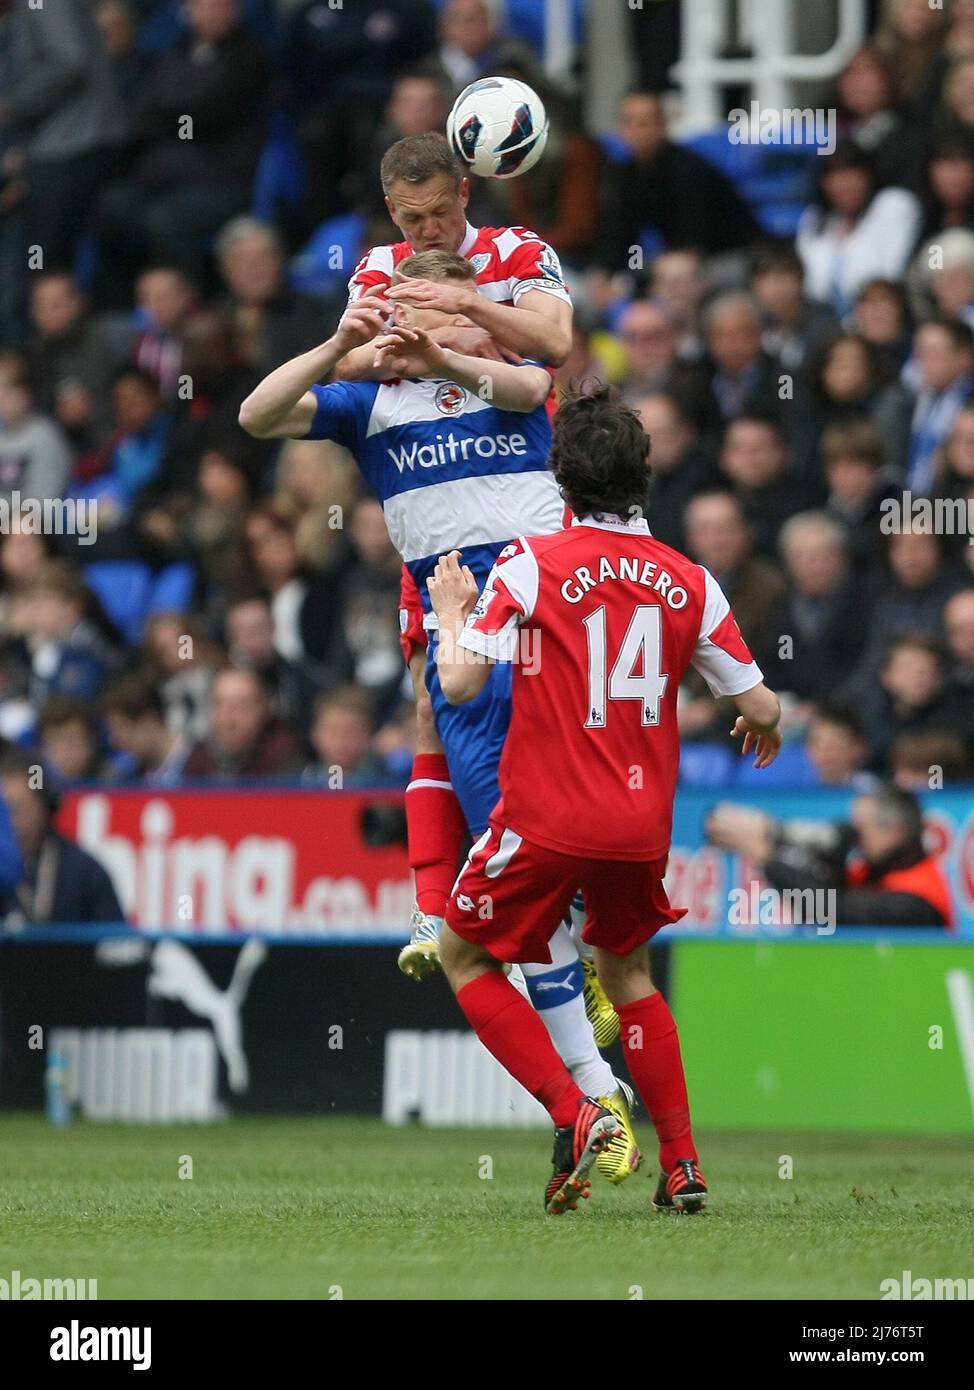 What QPR and Cardiff City's results mean for Reading FC and the